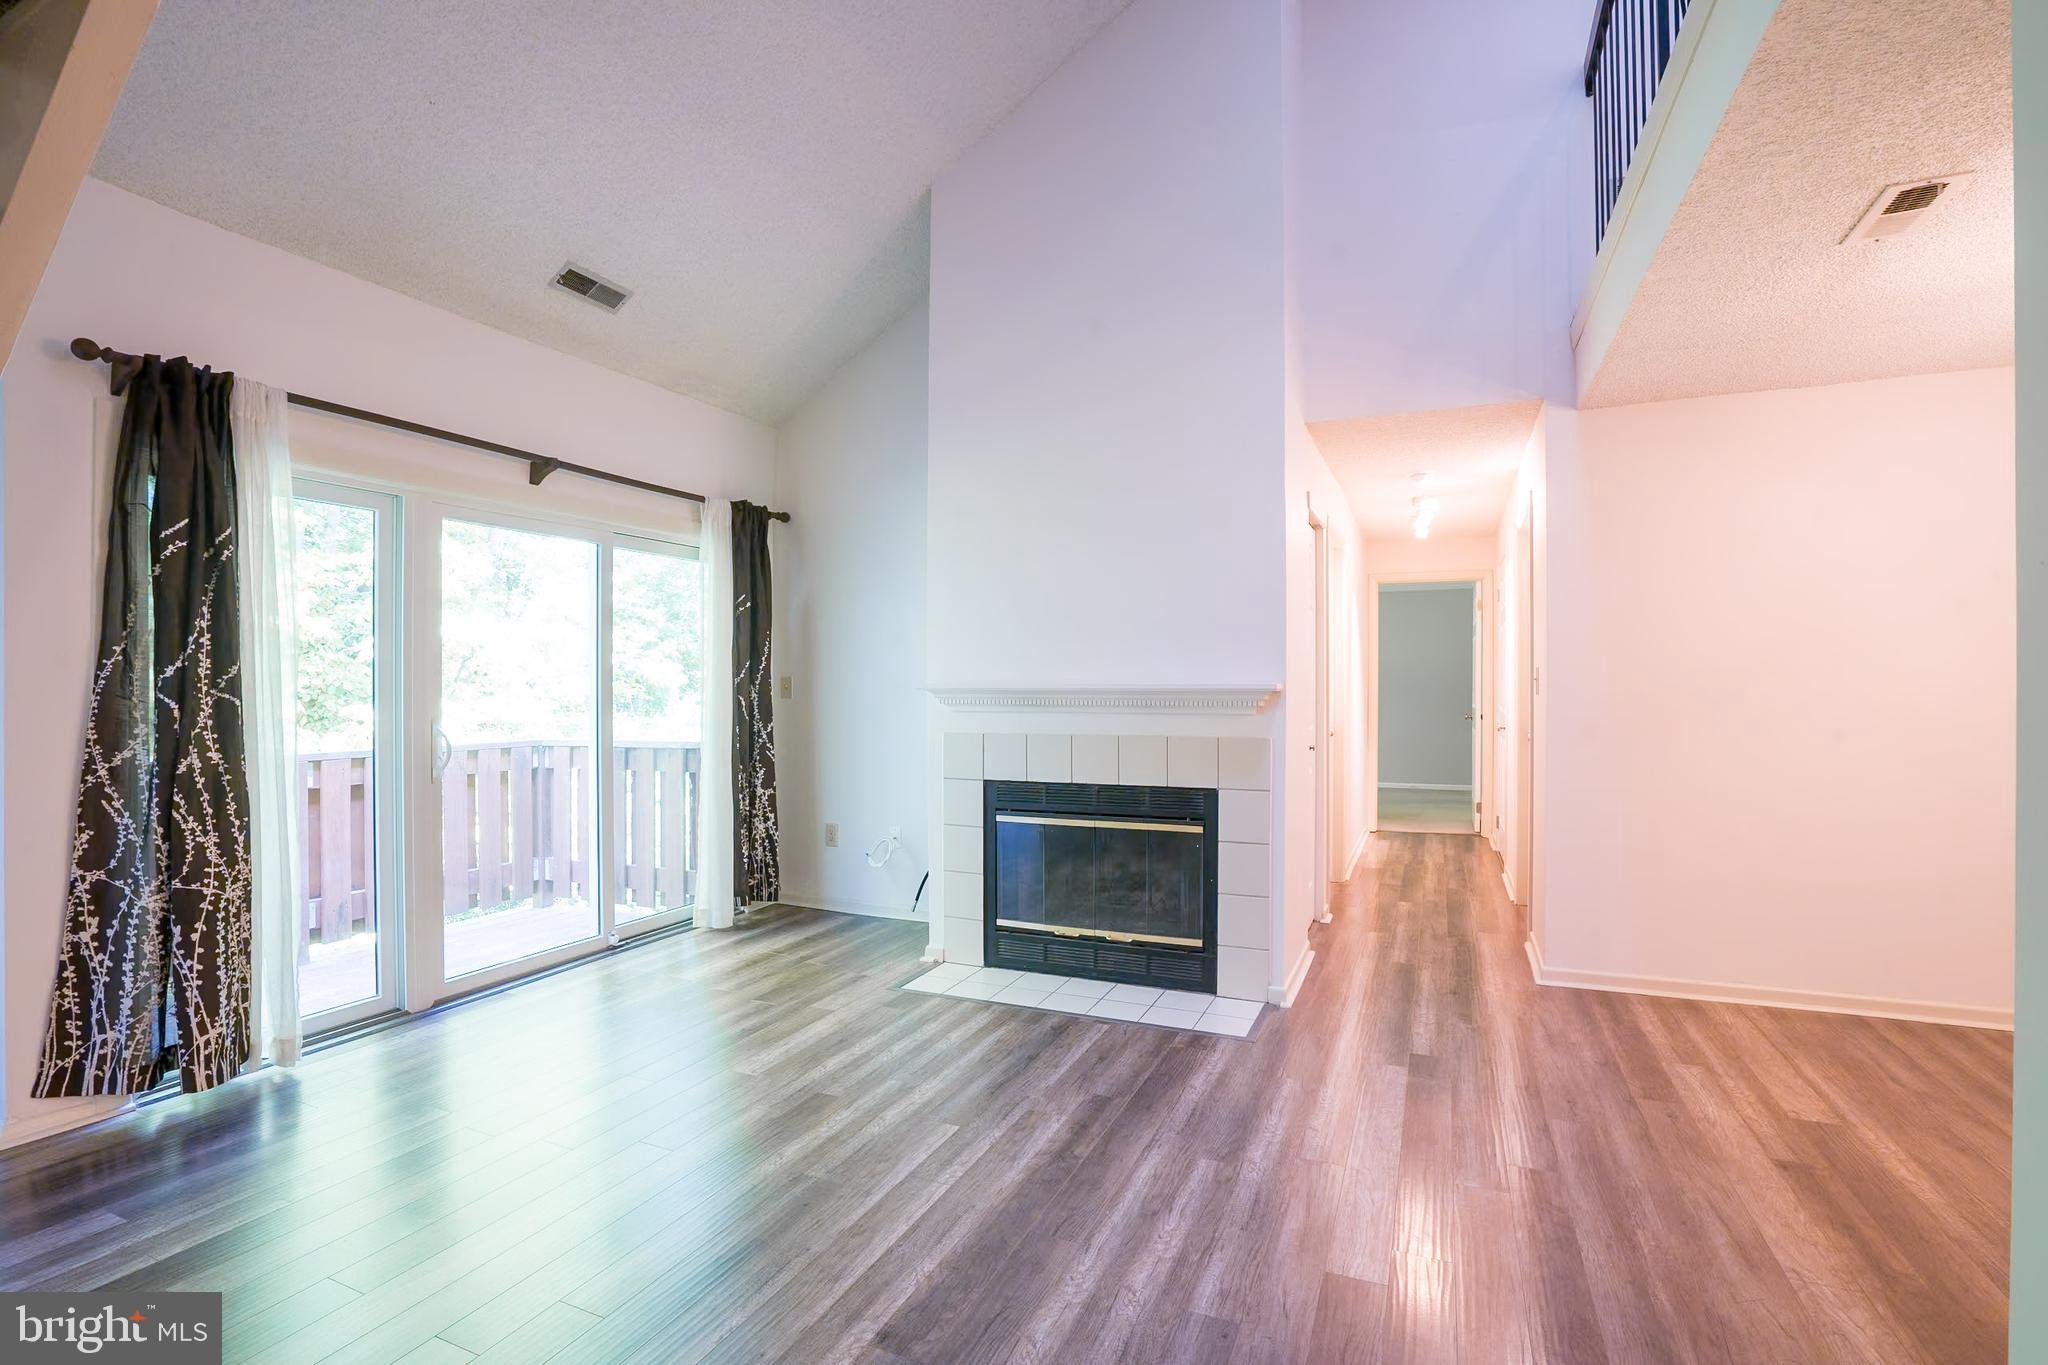 wooden floor fireplace and natural light in room